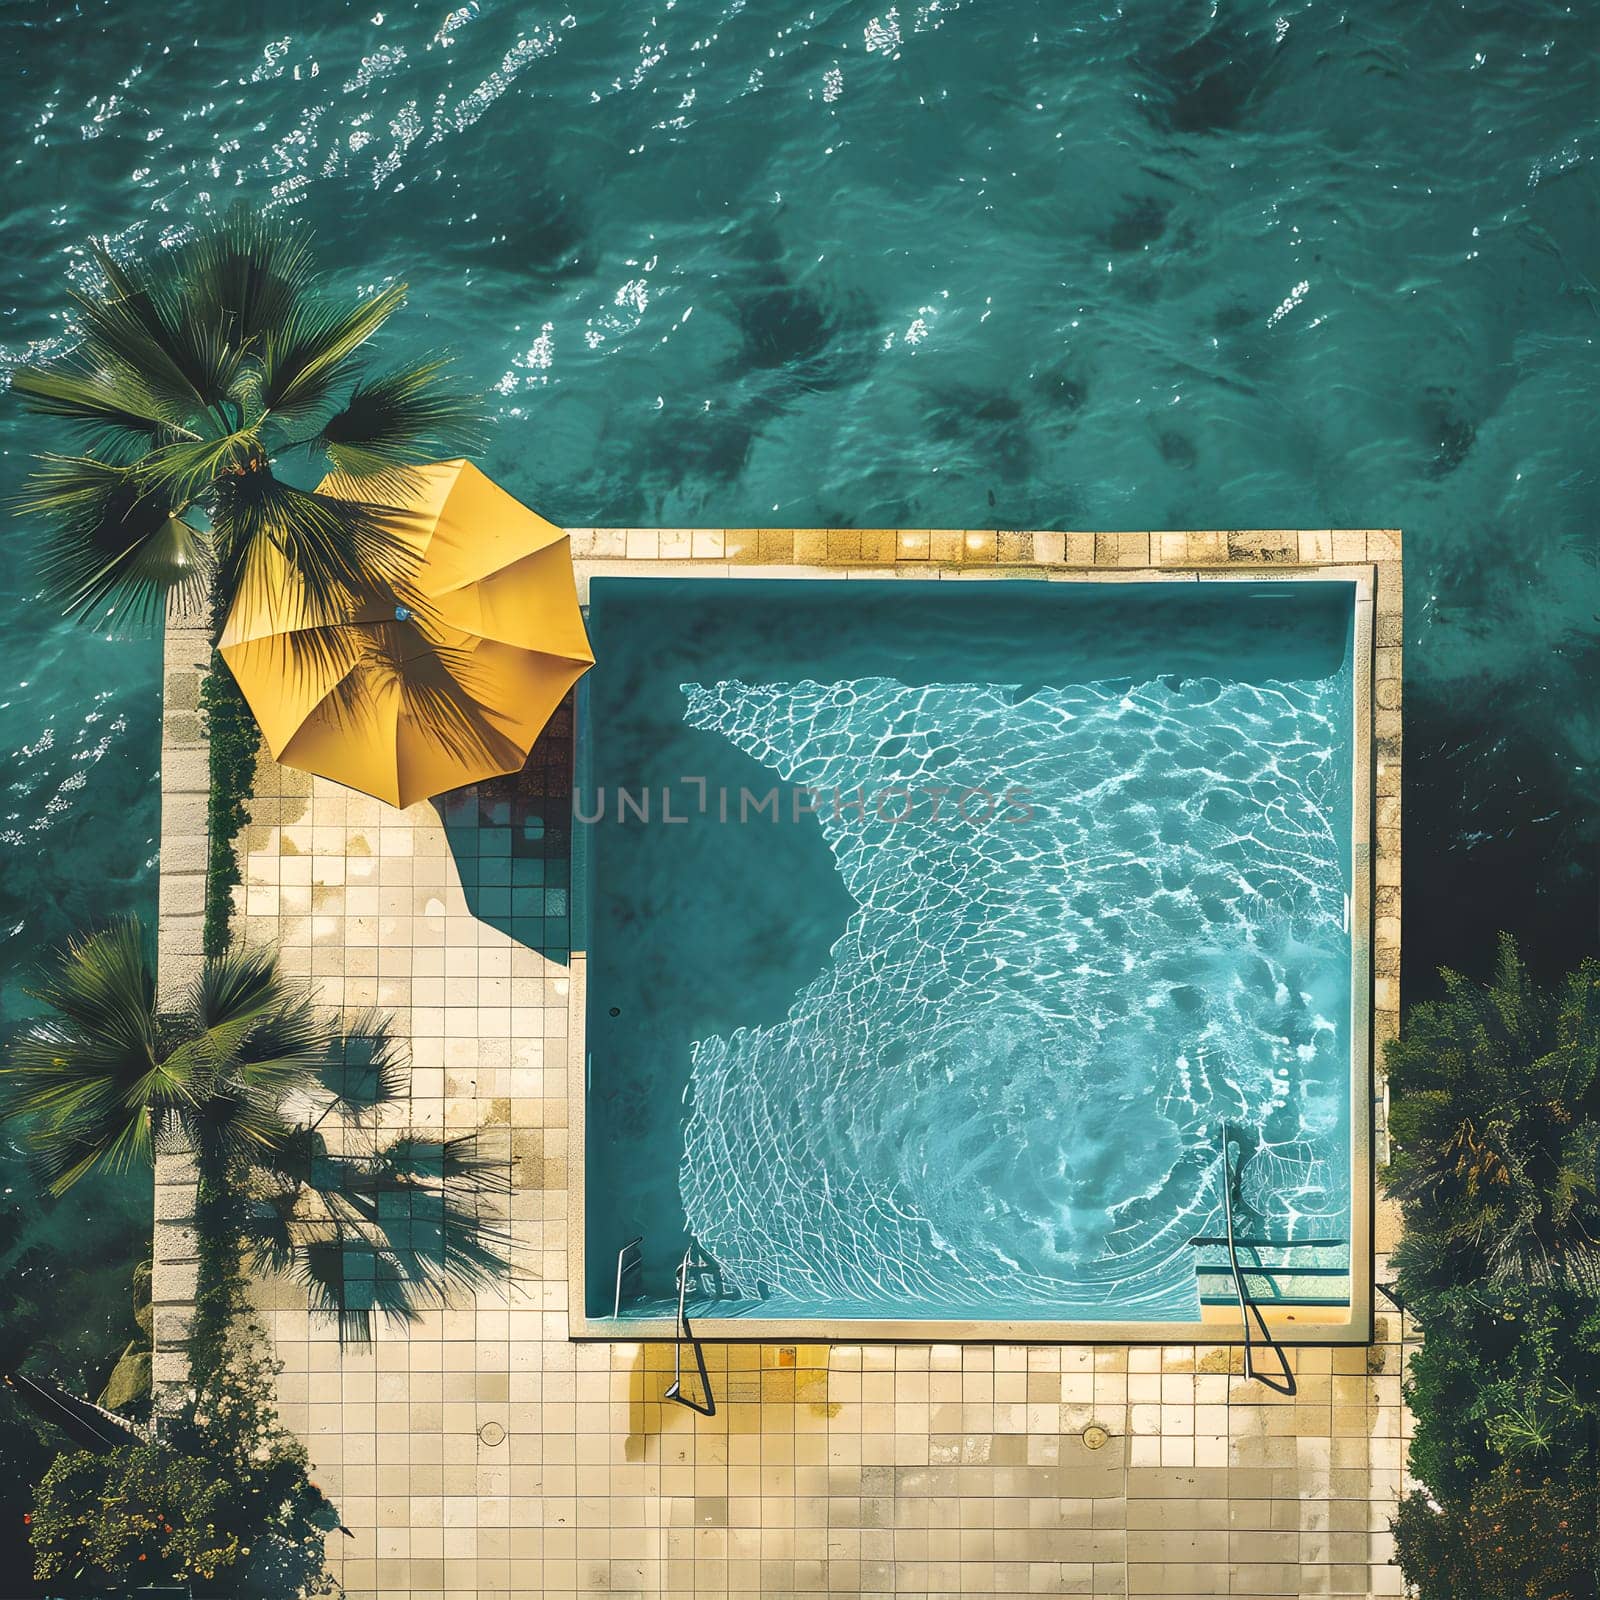 Aqua pool with yellow umbrella, palm trees, and azure water viewed from above by Nadtochiy